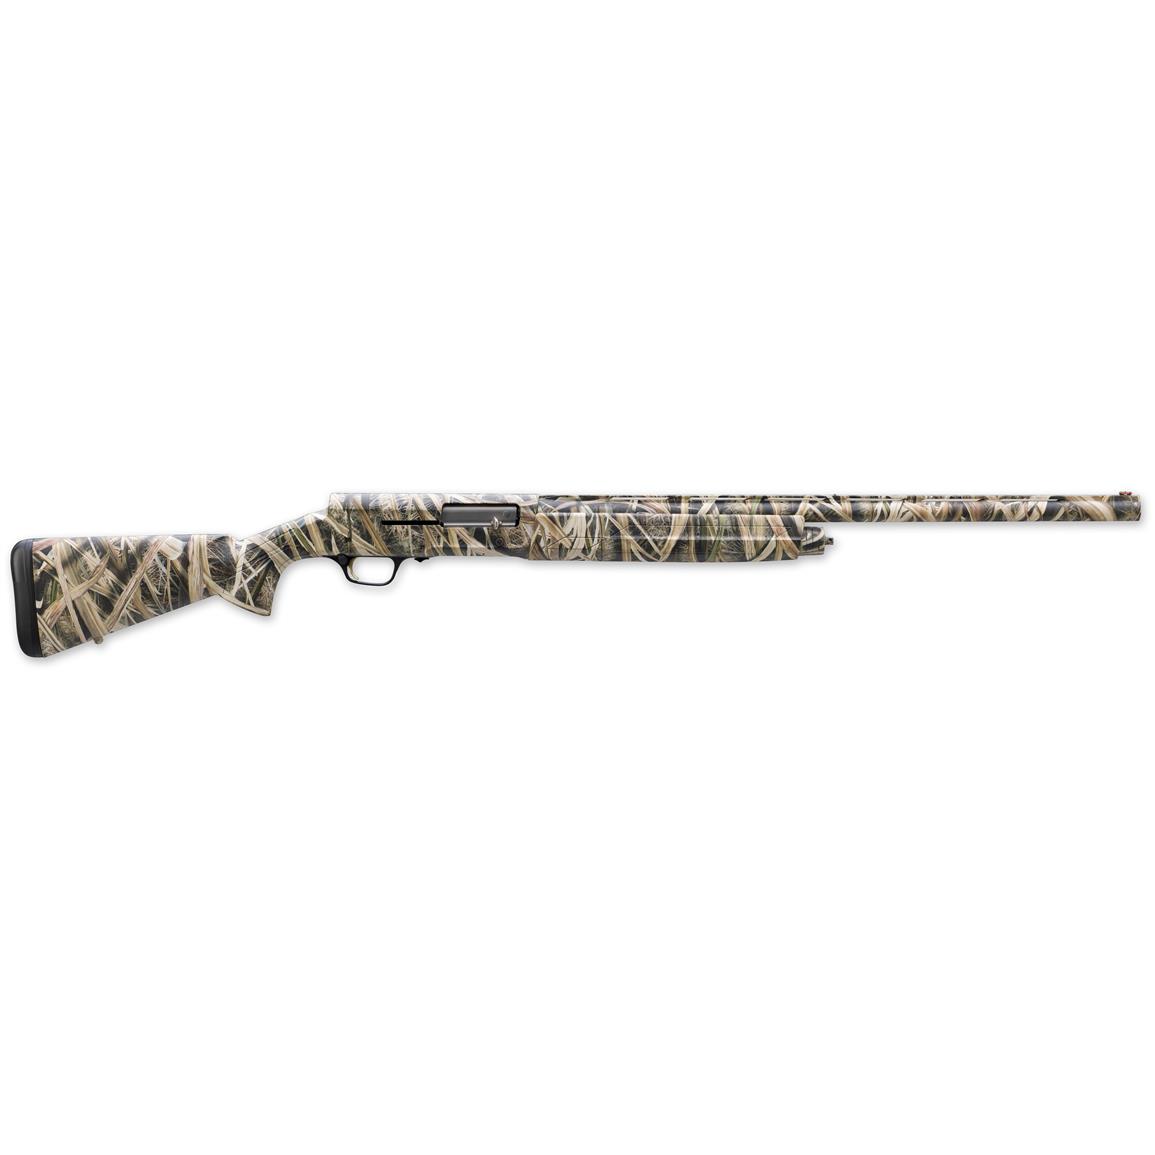 Browning A5 Mossy Oak Shadow Grass Blades, Semi-Automatic, 12 Gauge, 28" Barrel, 4 1 Rounds